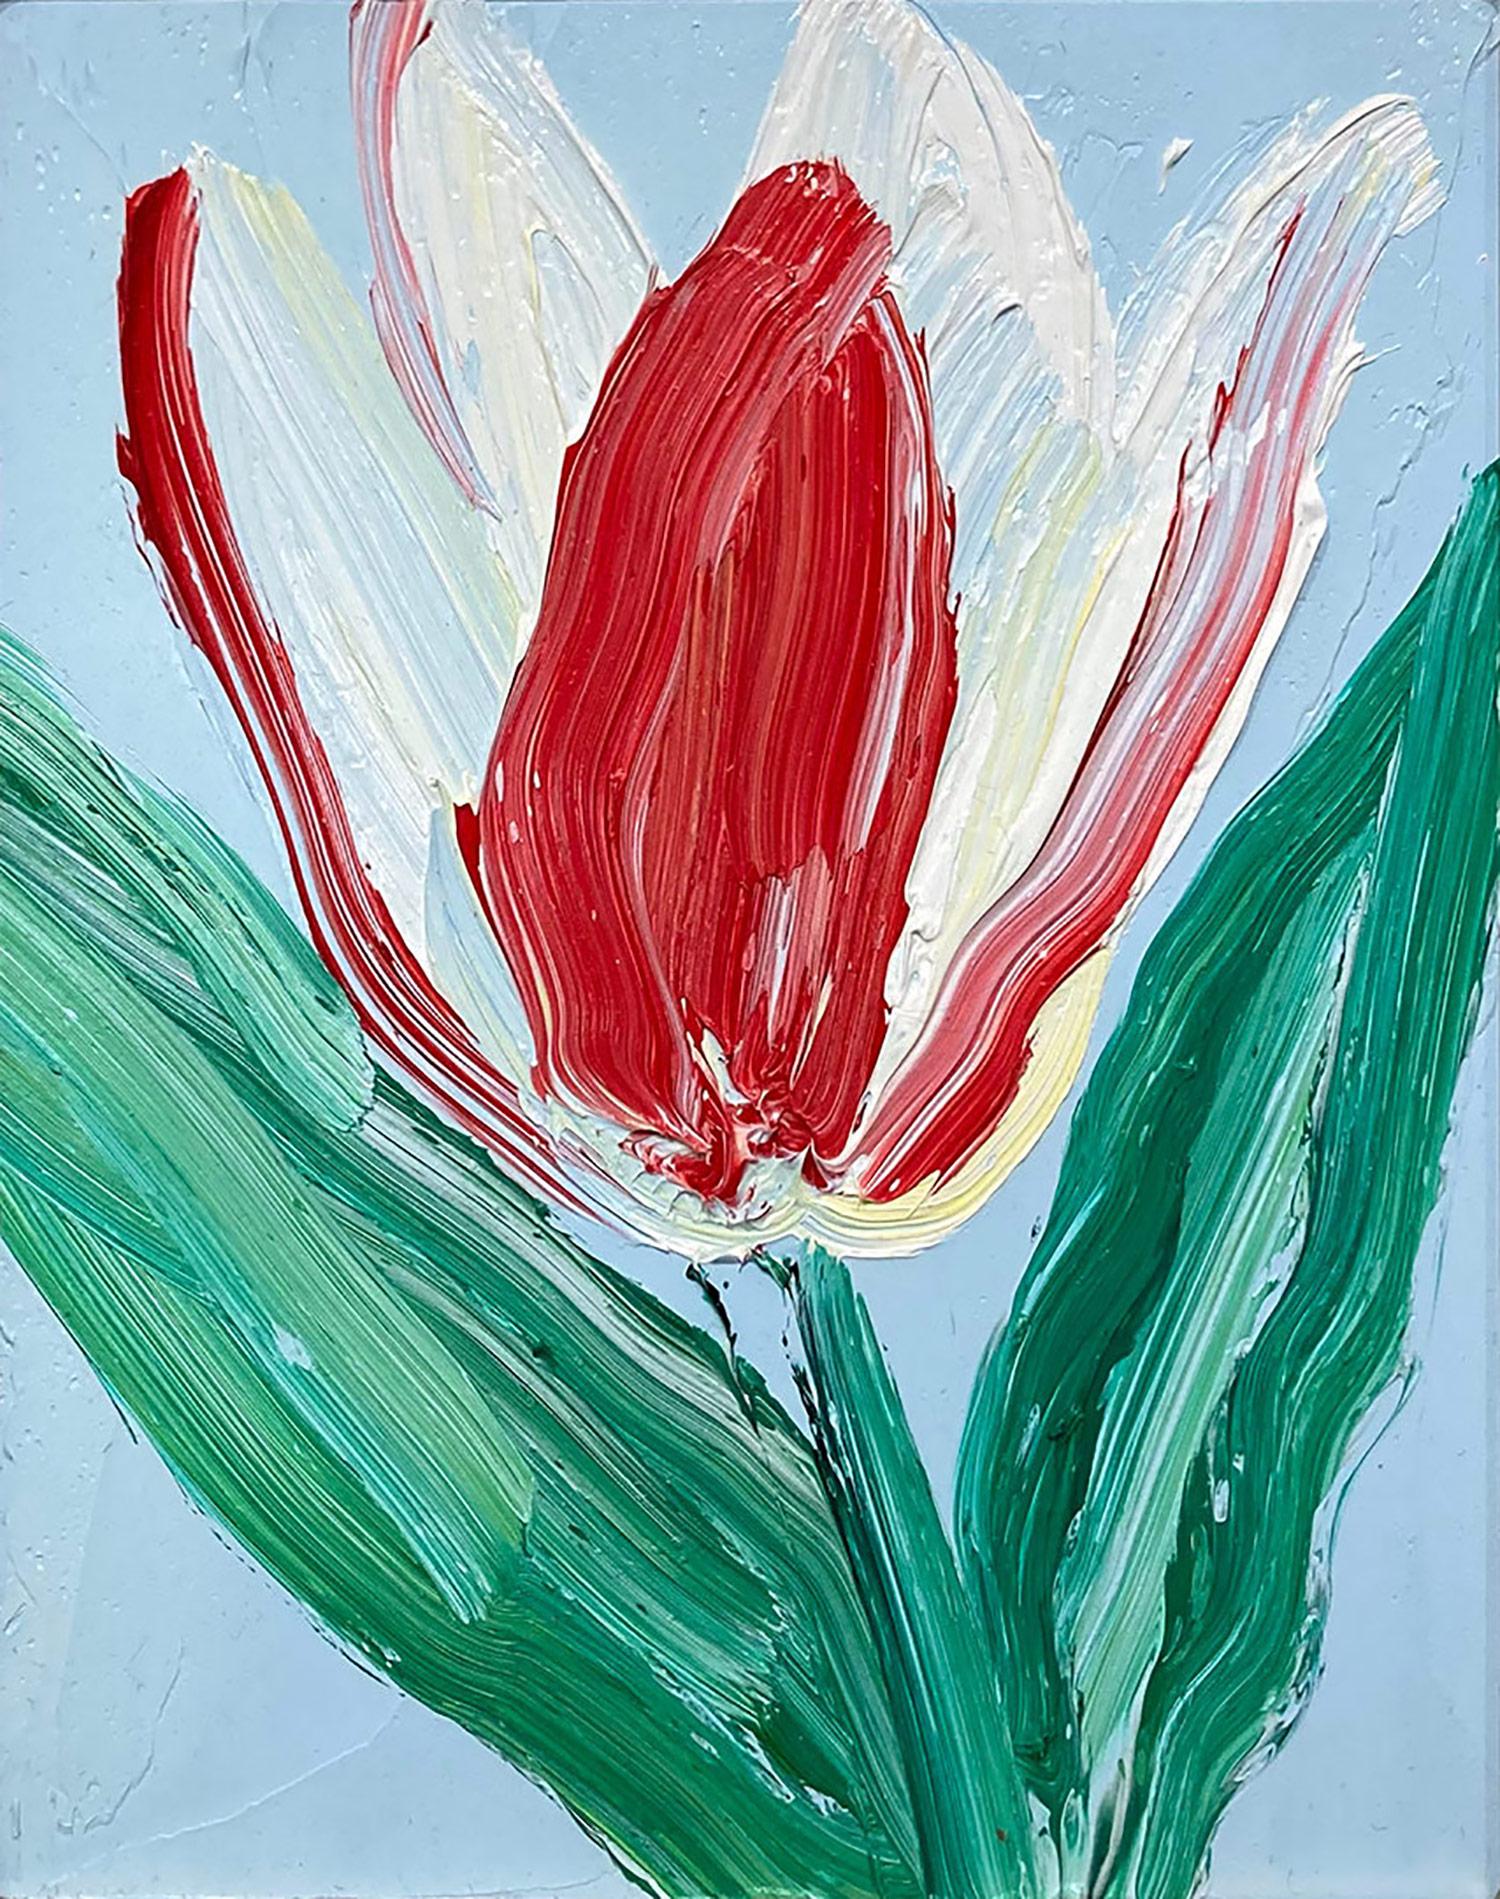 A wonderful composition of one of Slonem's newest series, Tulips. This piece depicts gestural figure of a red and white Tulip on a light sky blue background with thick use of paint. Inspired by nature and a genuine love for animals, Slonem's